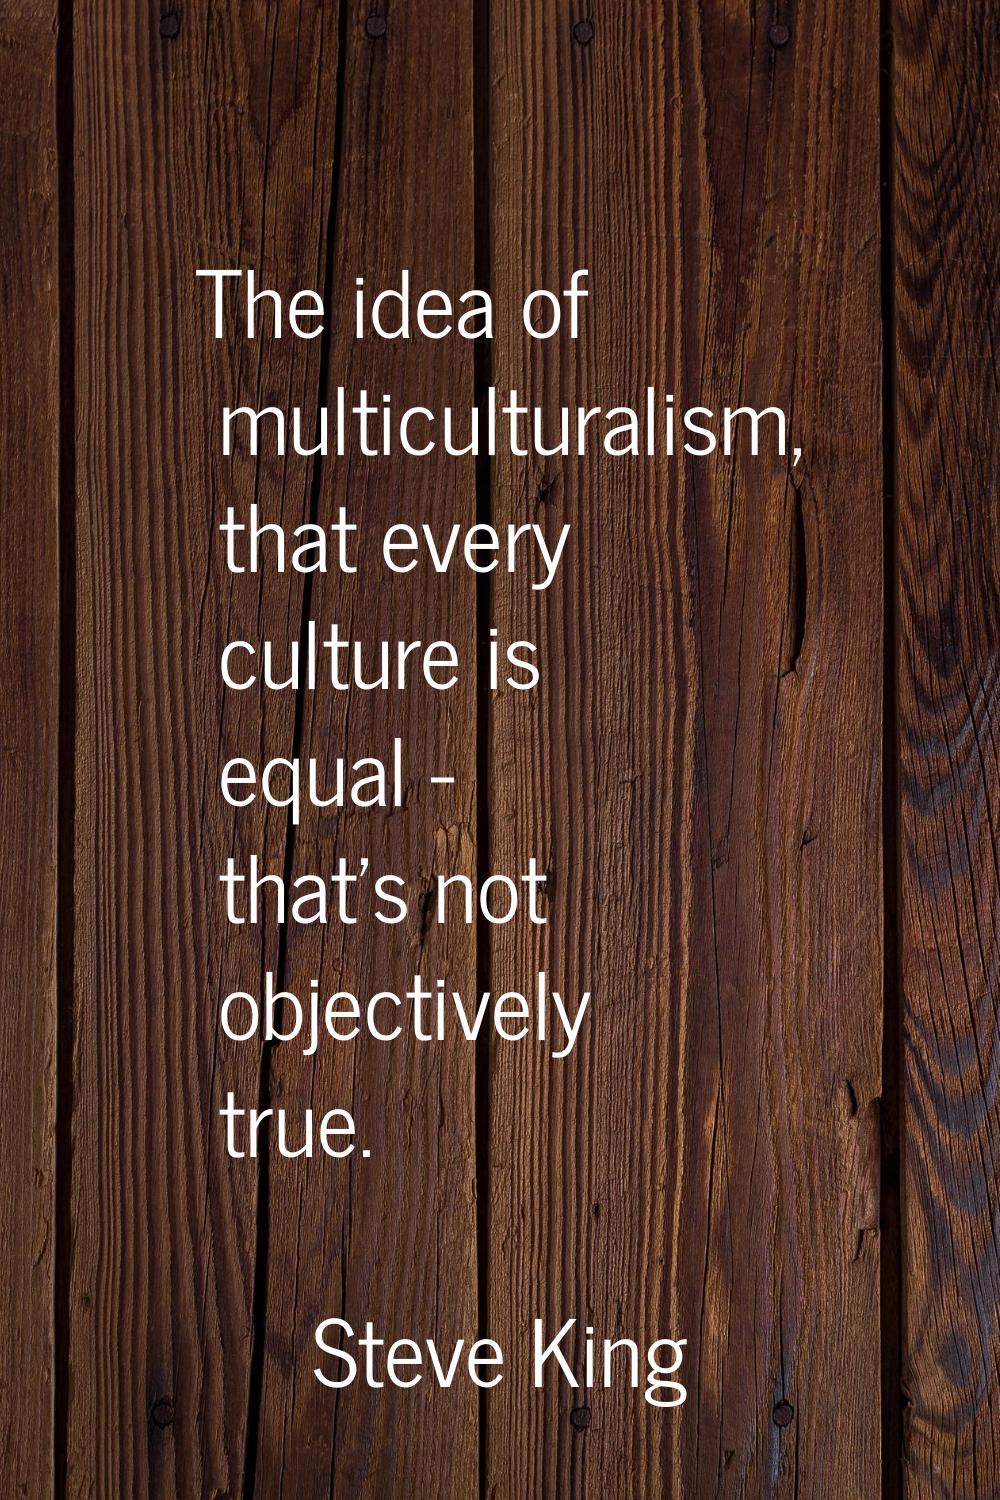 The idea of multiculturalism, that every culture is equal - that's not objectively true.